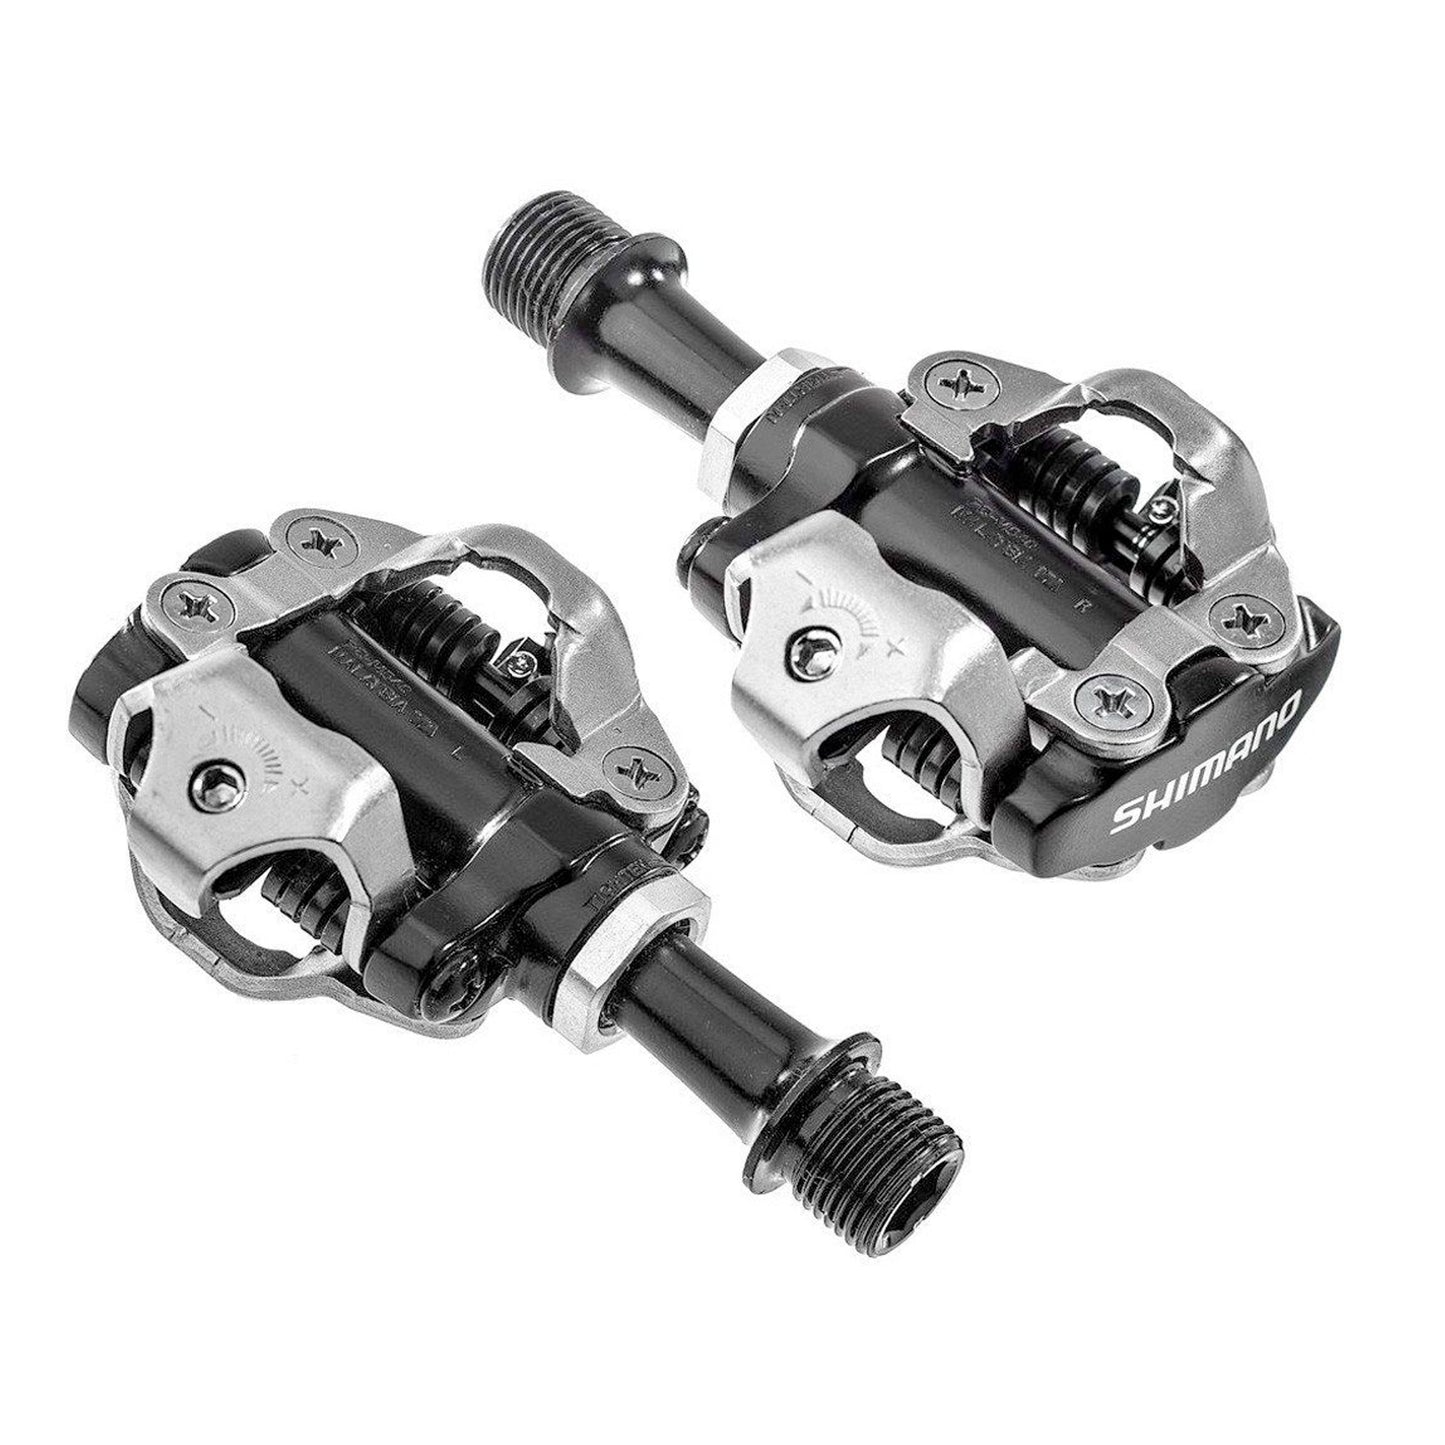 Shimano PD-M540 SPD MTB Pedals - Black buy online at Woolys Wheels bike shop Sydney with free delivery